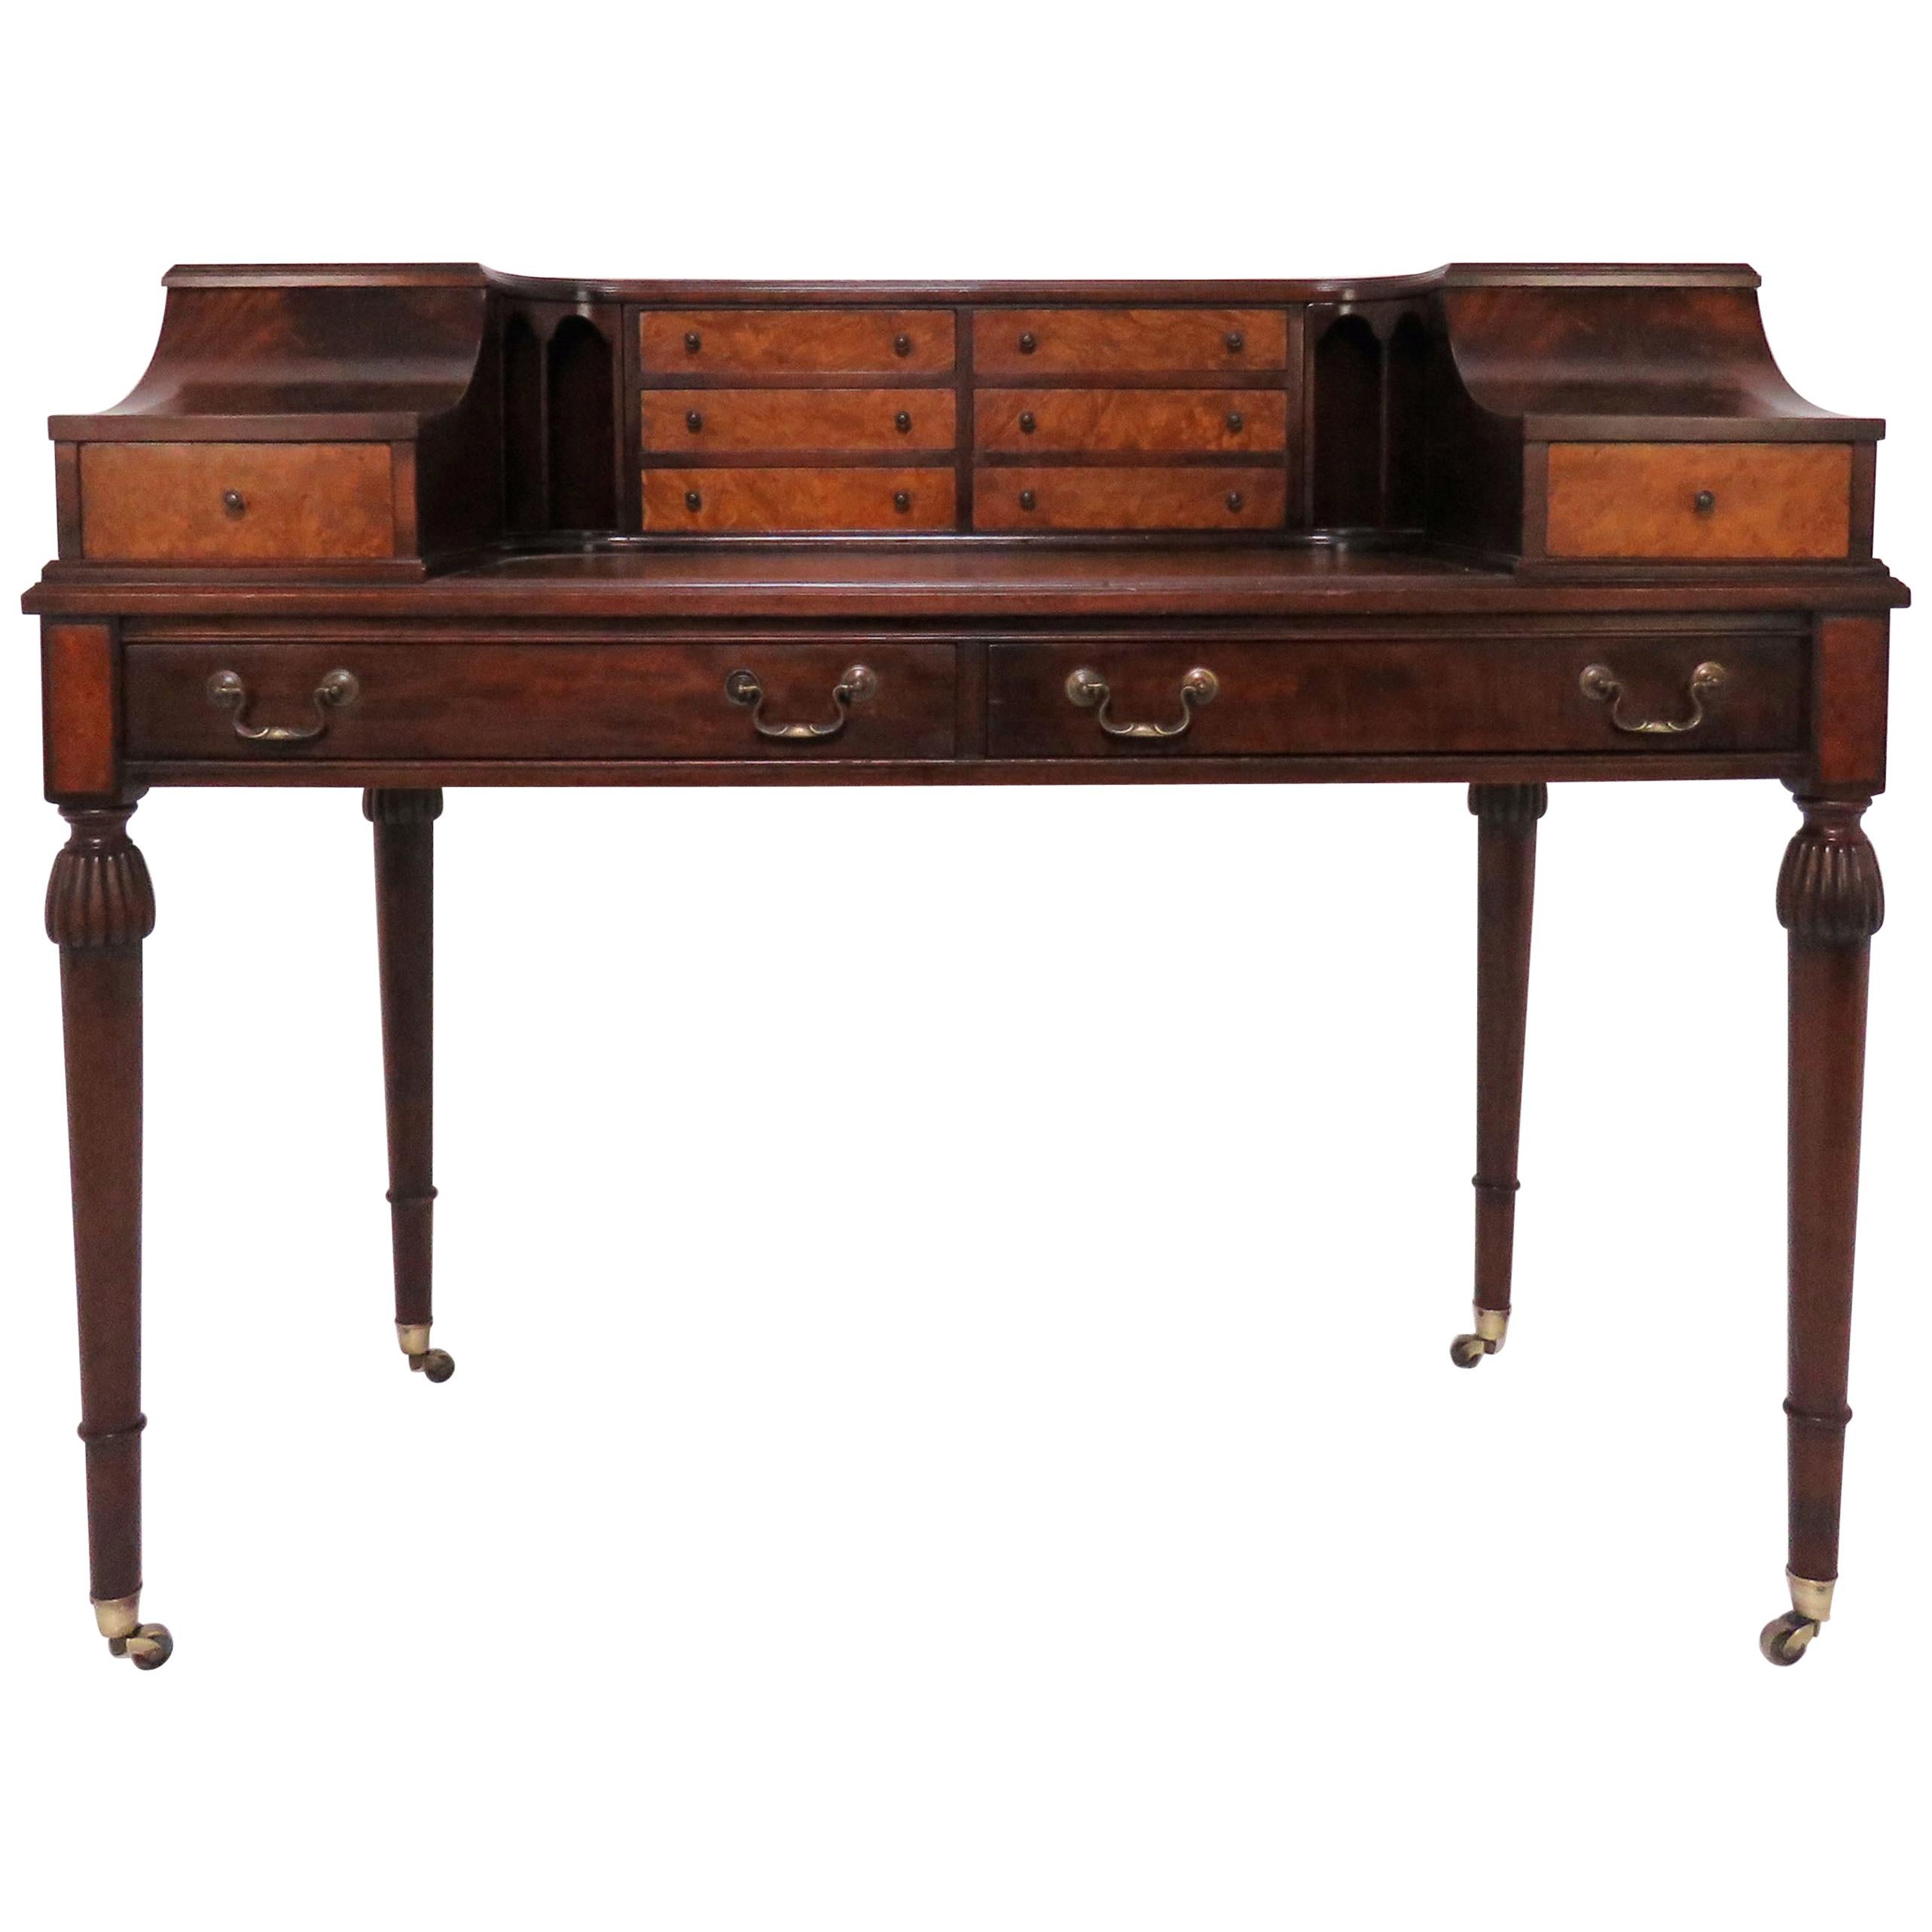 Carlton House Style Mahogany and Burl Leather Top Writing Desk